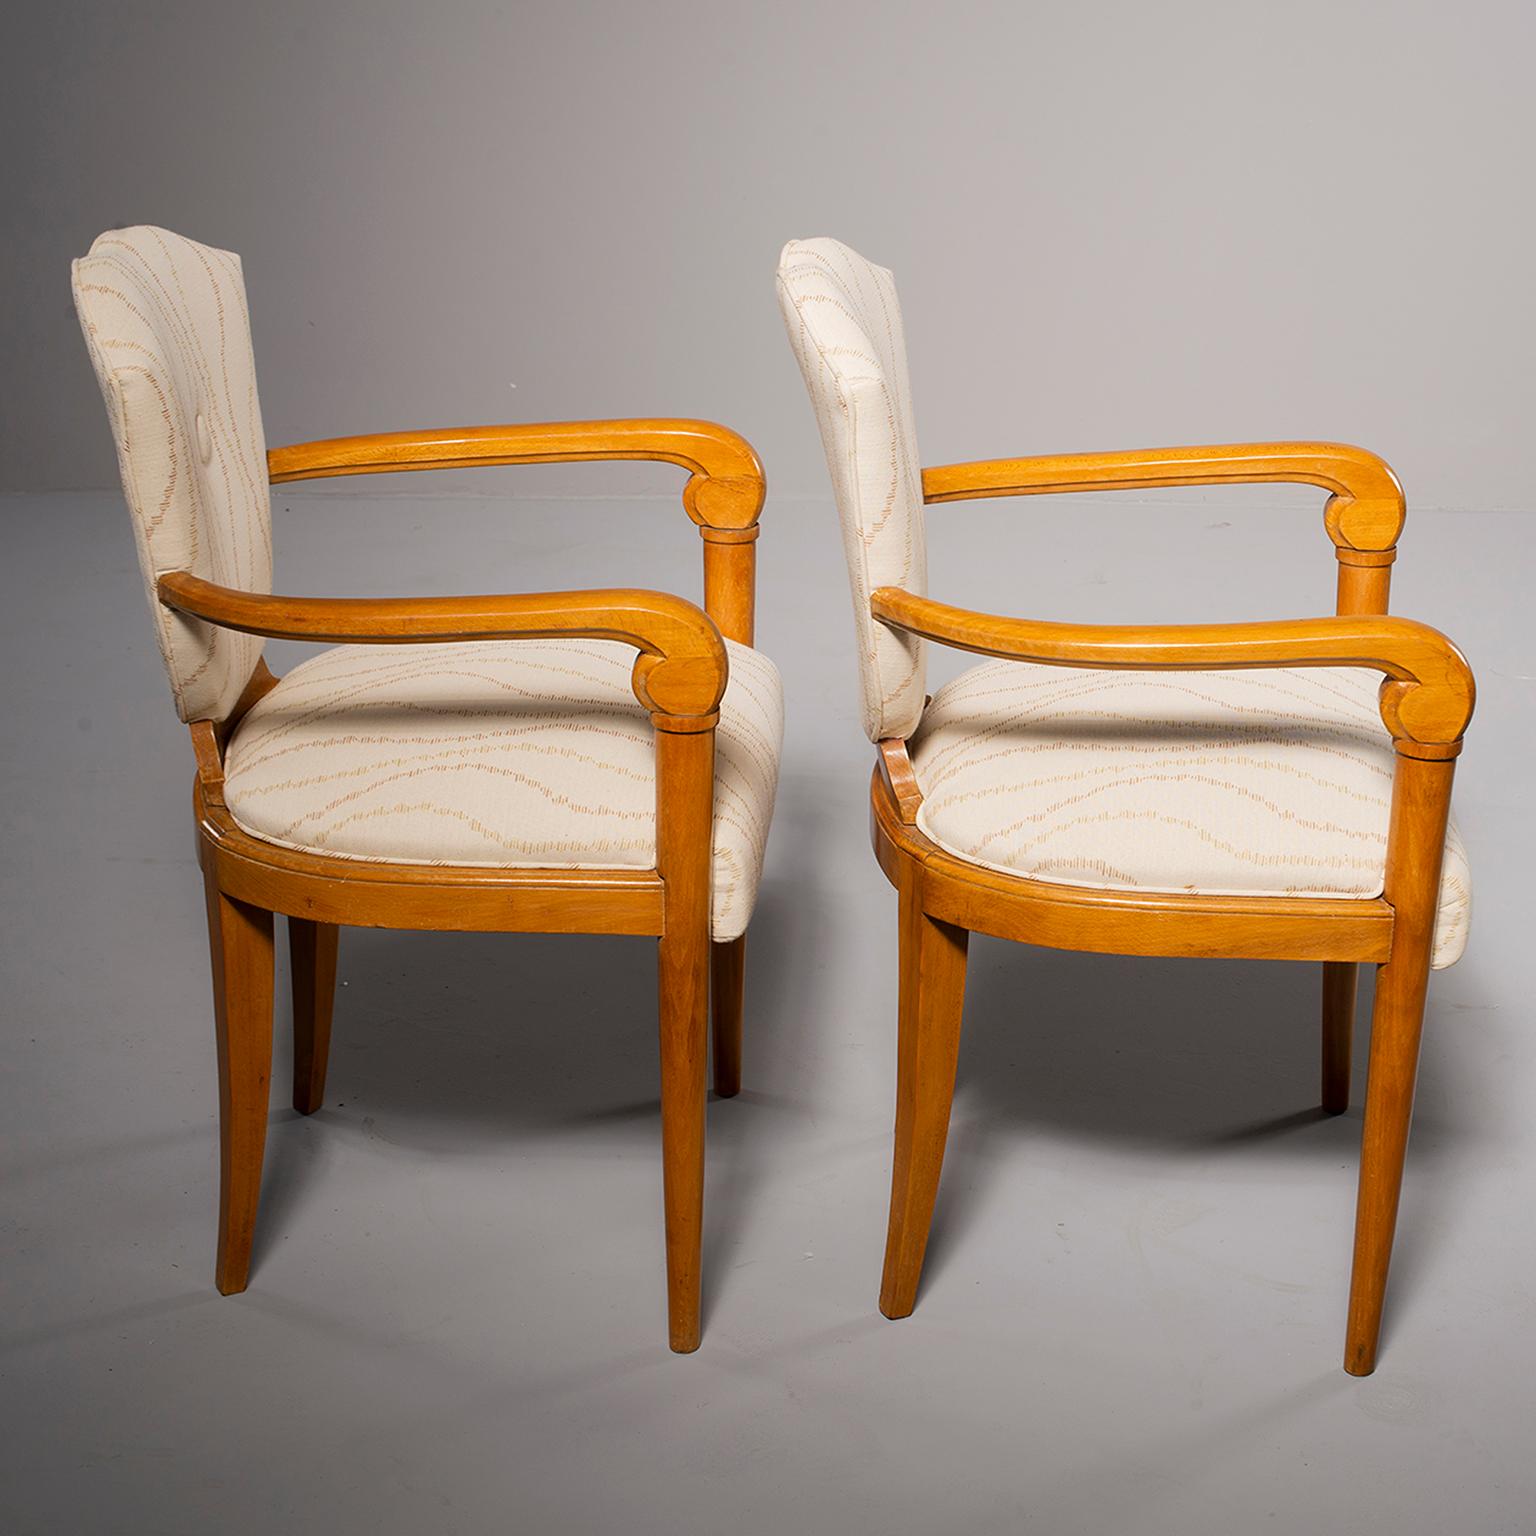 Pair of circa 1940s French bridge chairs have polished beech frames with curved arms, shield-shaped back rests and are newly upholstered in Robert Allen fabric in neutral tones. Measures: Arms are 25.25” high and seats are 19.75” high. Priced and